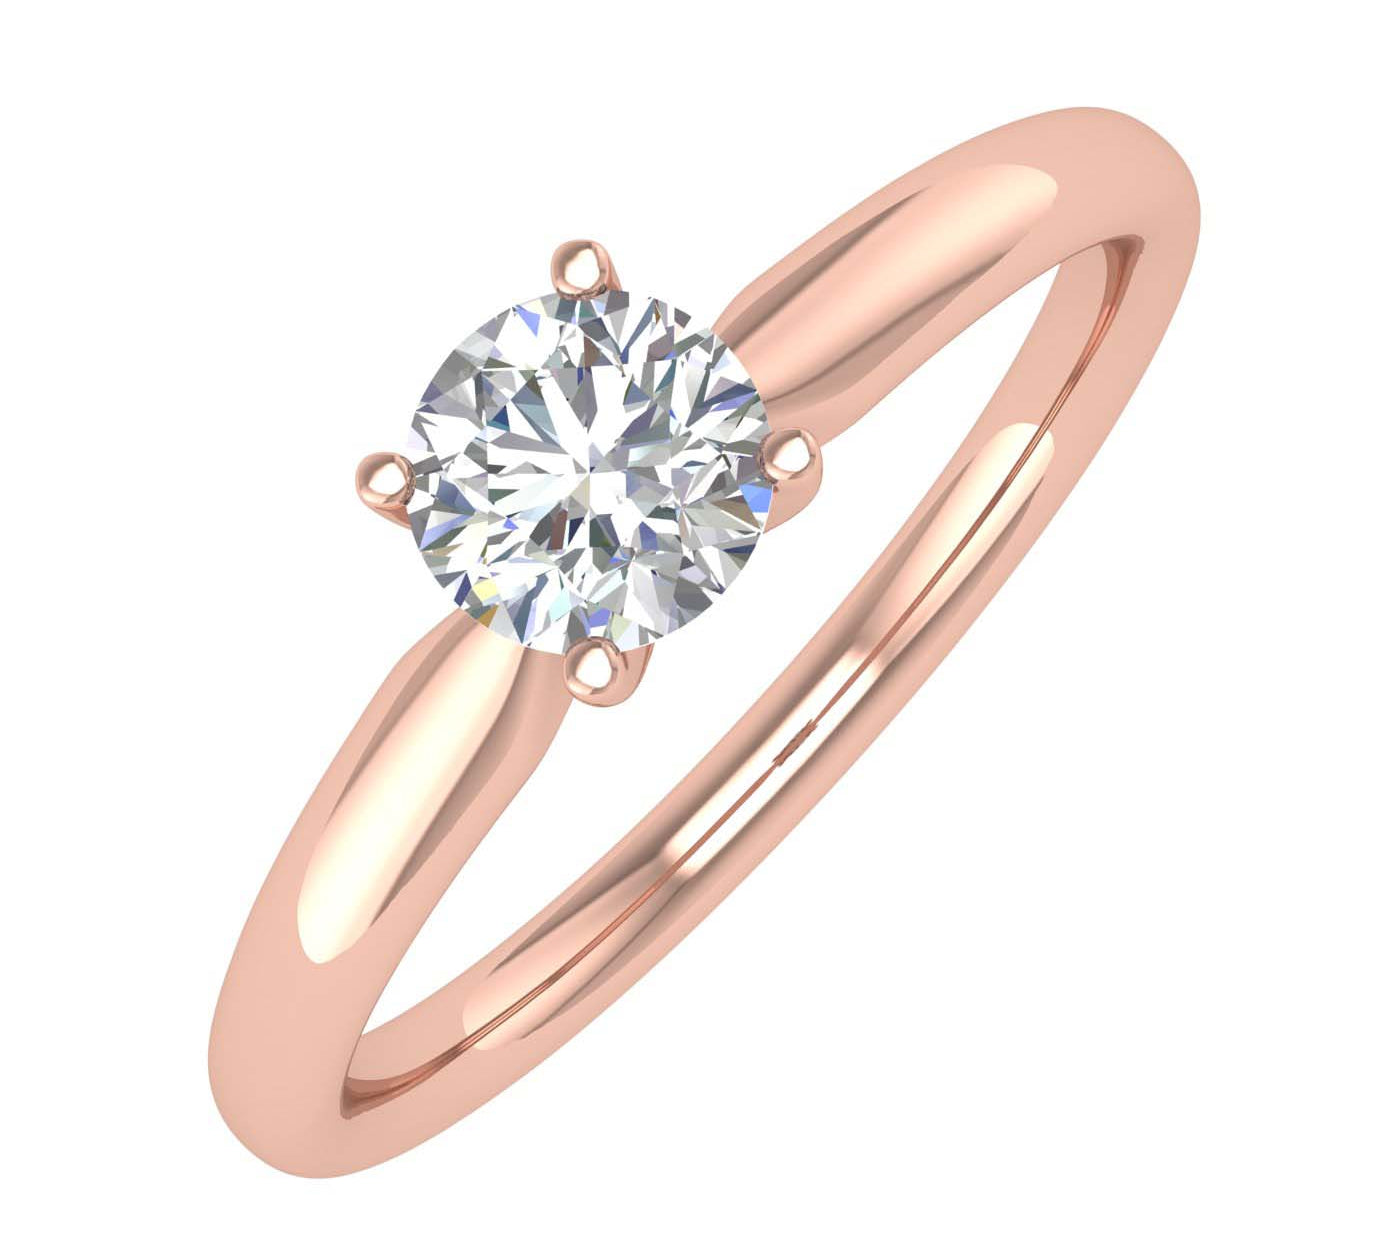 0.40 Carat Diamond Solitaire Engagement Ring Band in Gold - IGI Certified